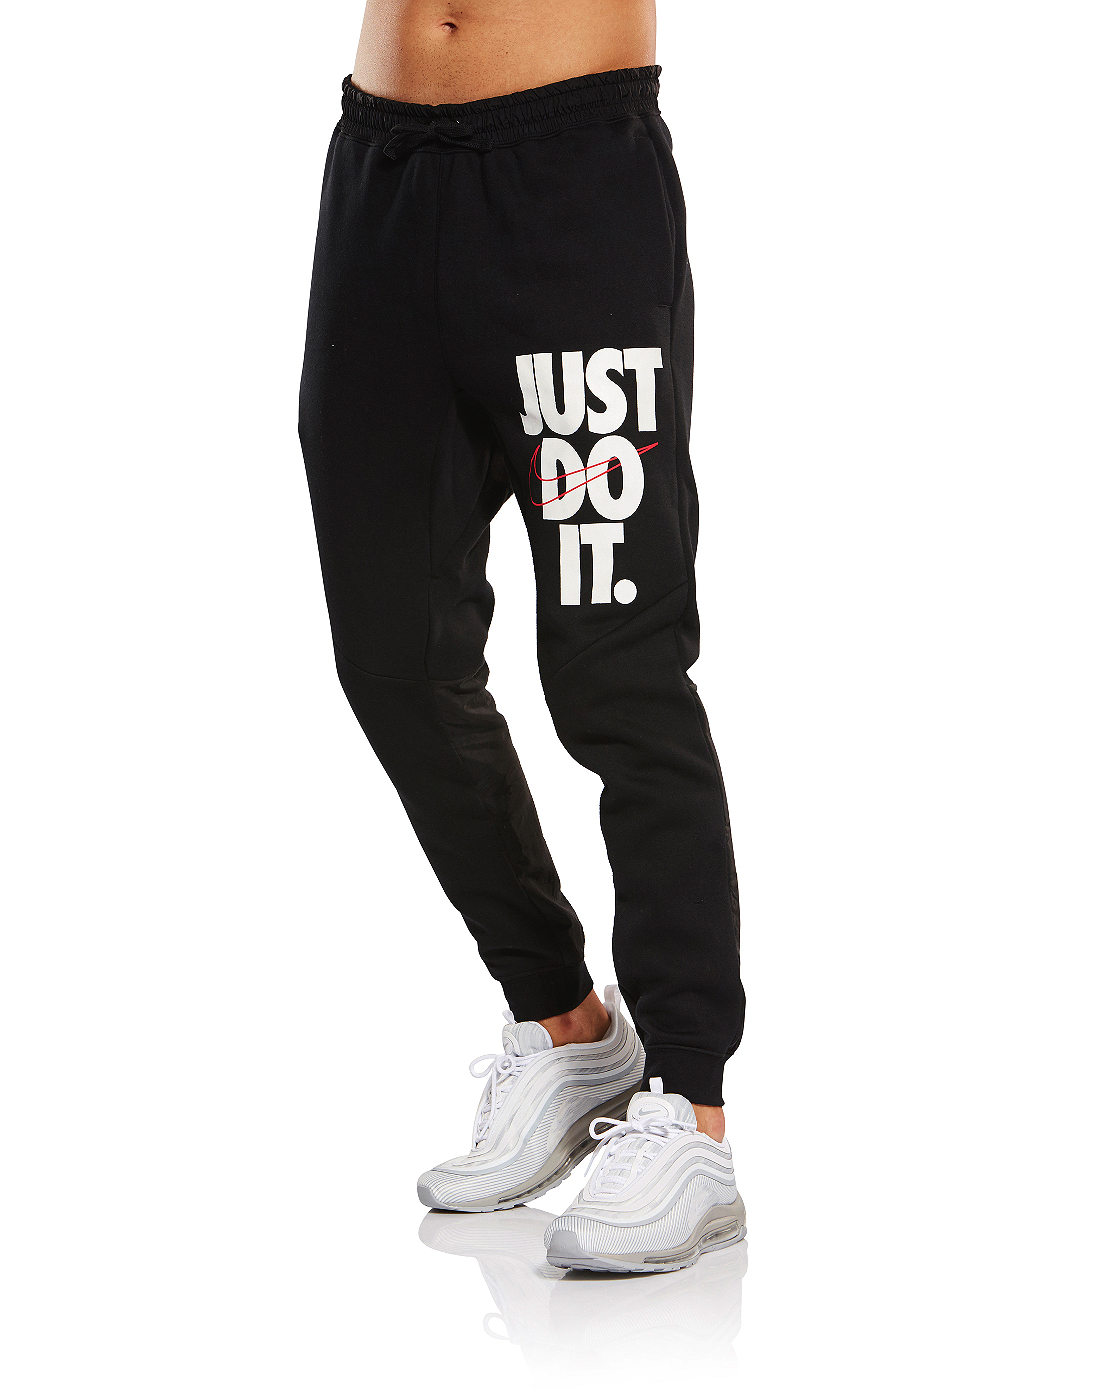 nike joggers just do it